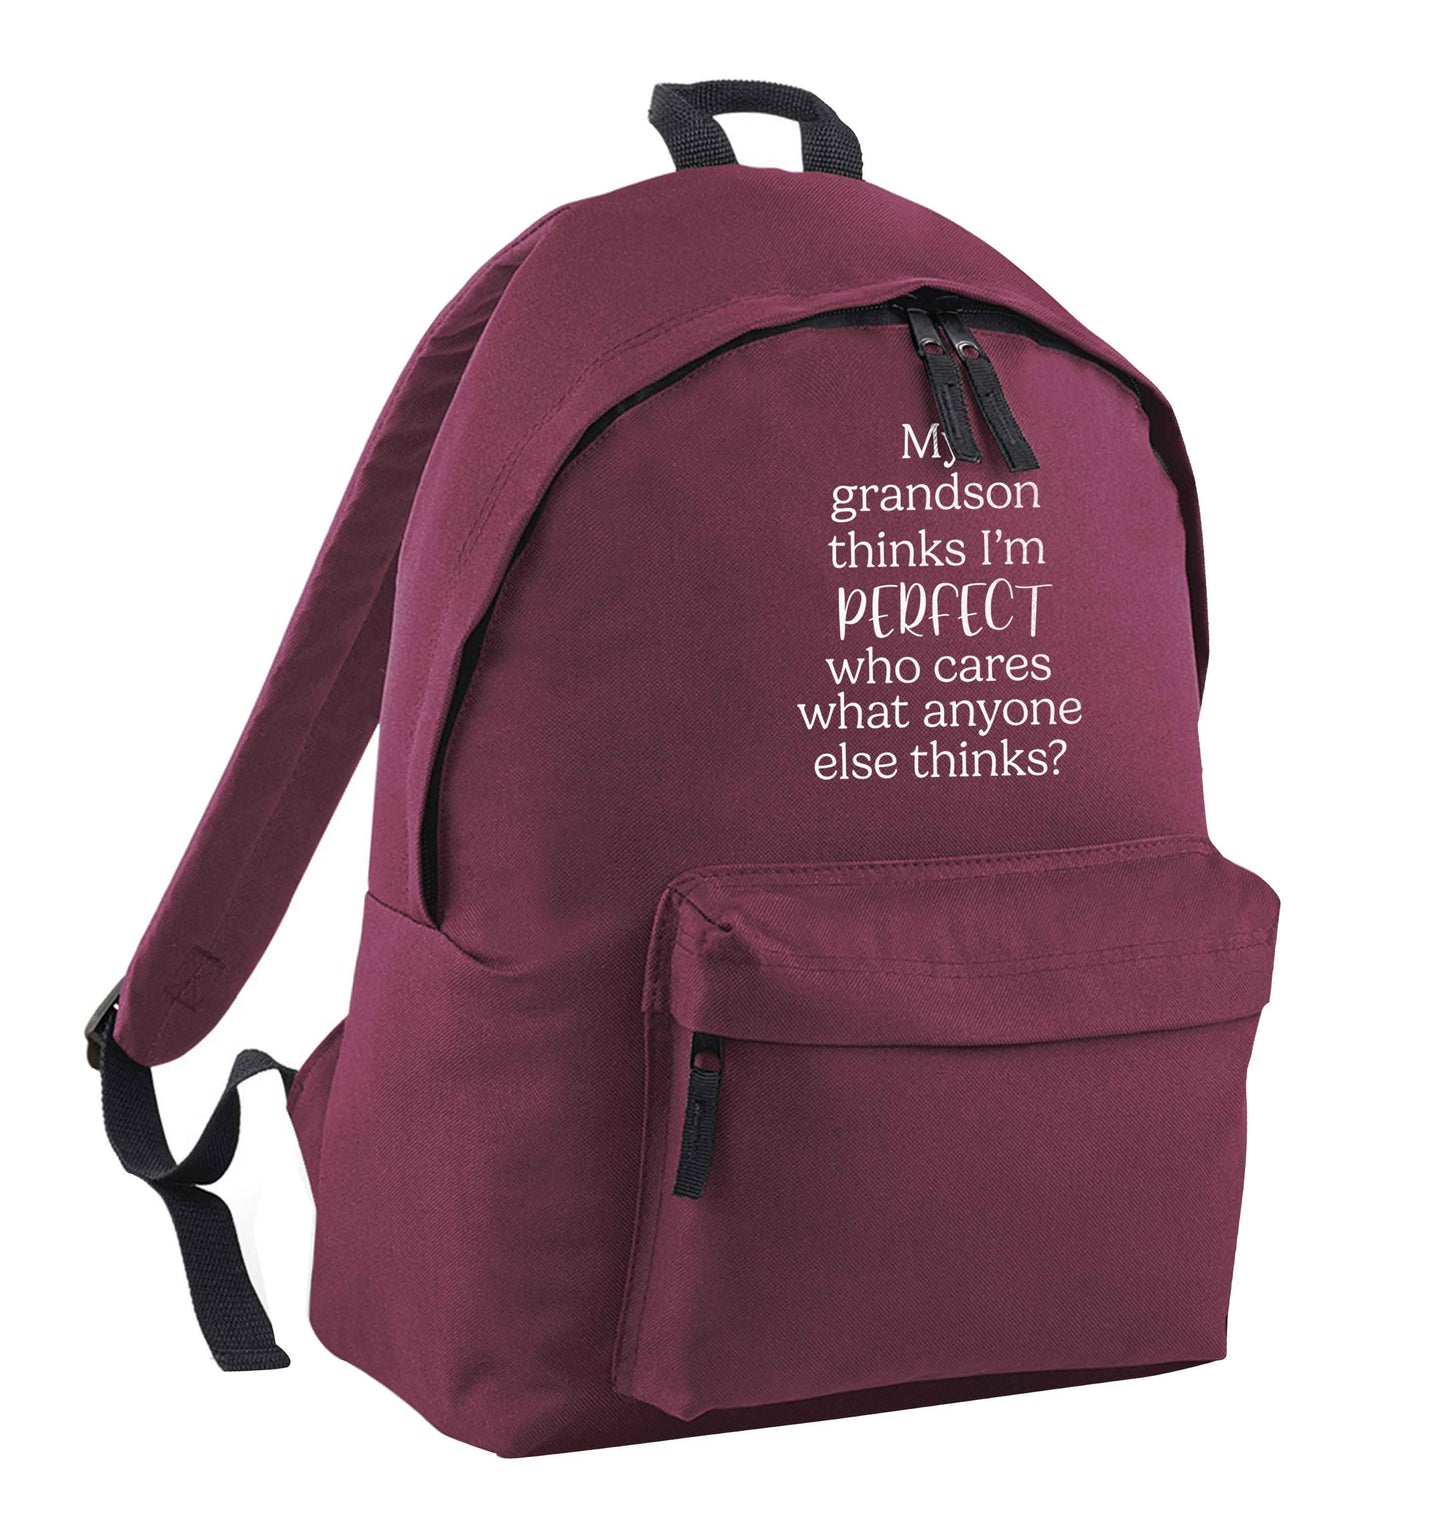 My Grandson thinks I'm perfect who cares what anyone else thinks? maroon adults backpack